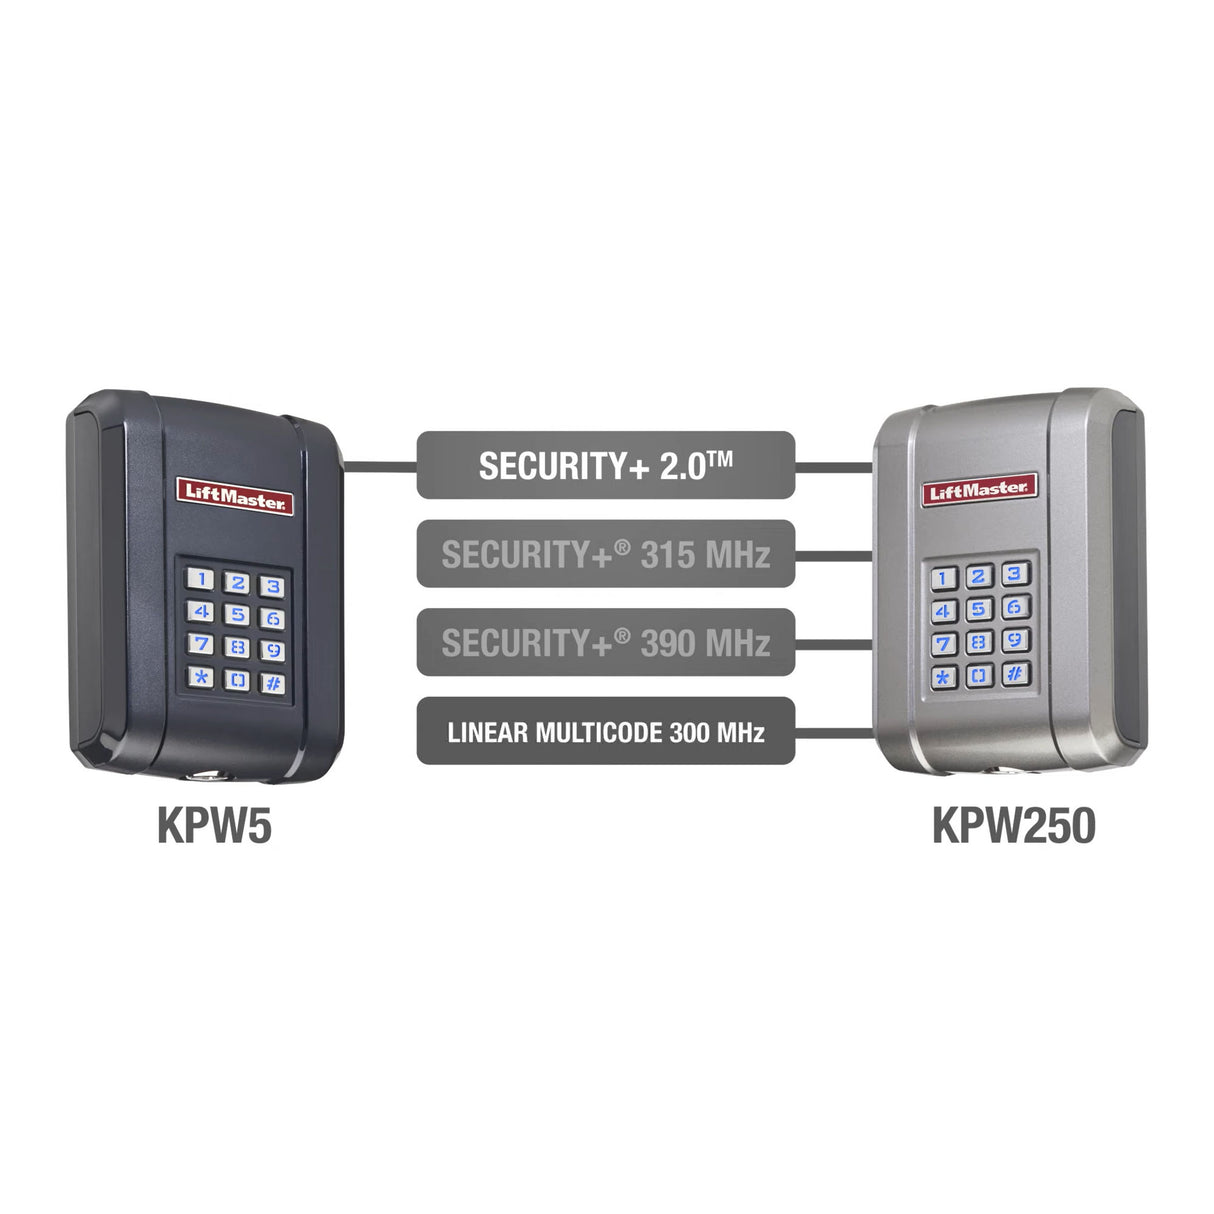 the difference between KPW5 and KPW250